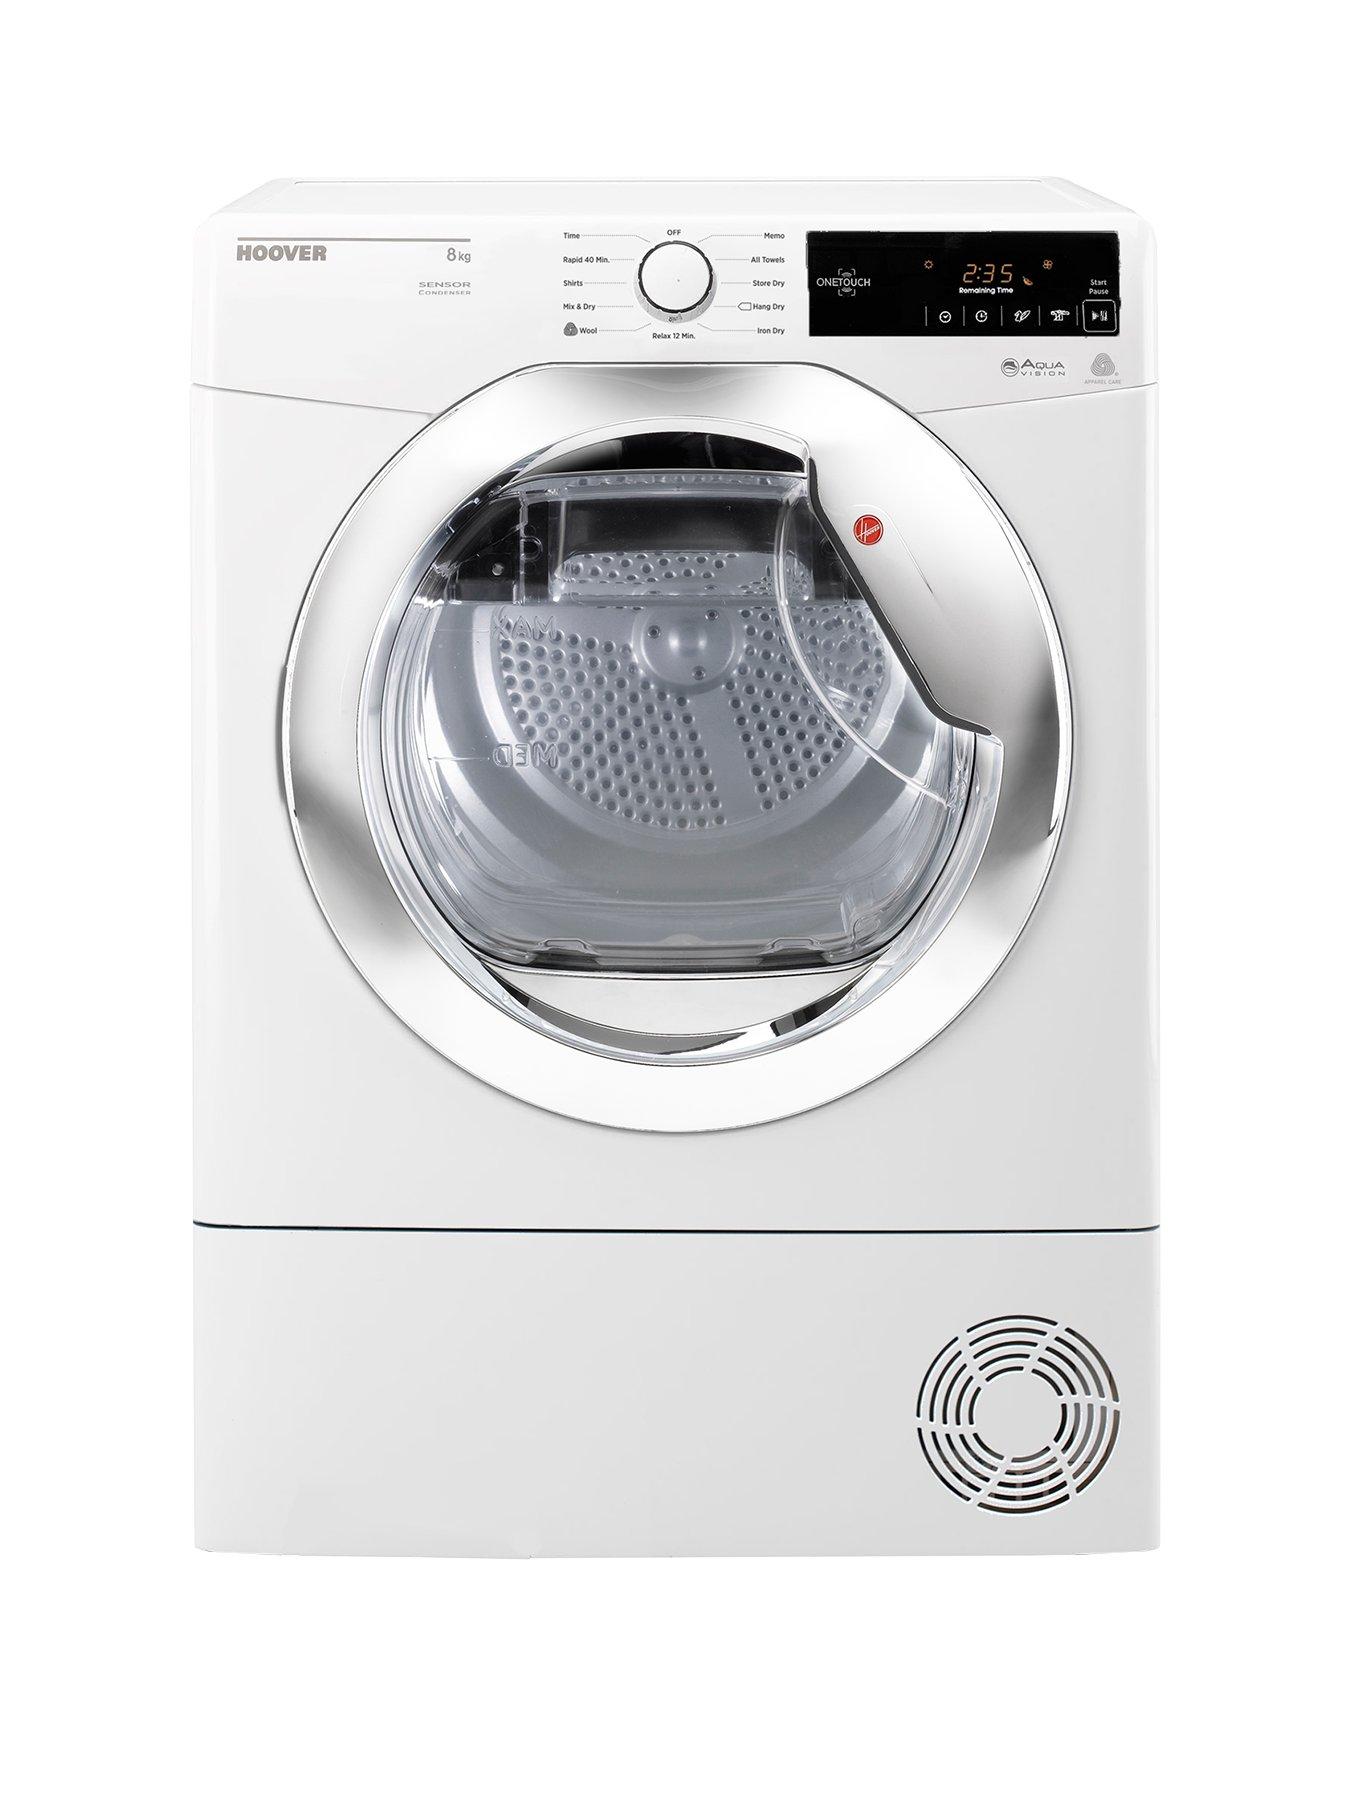 Hoover Dynamic Next Dxc8Tce 8Kg Load, Aquavision Condenser Tumble Dryer With One Touch – White/Chrome